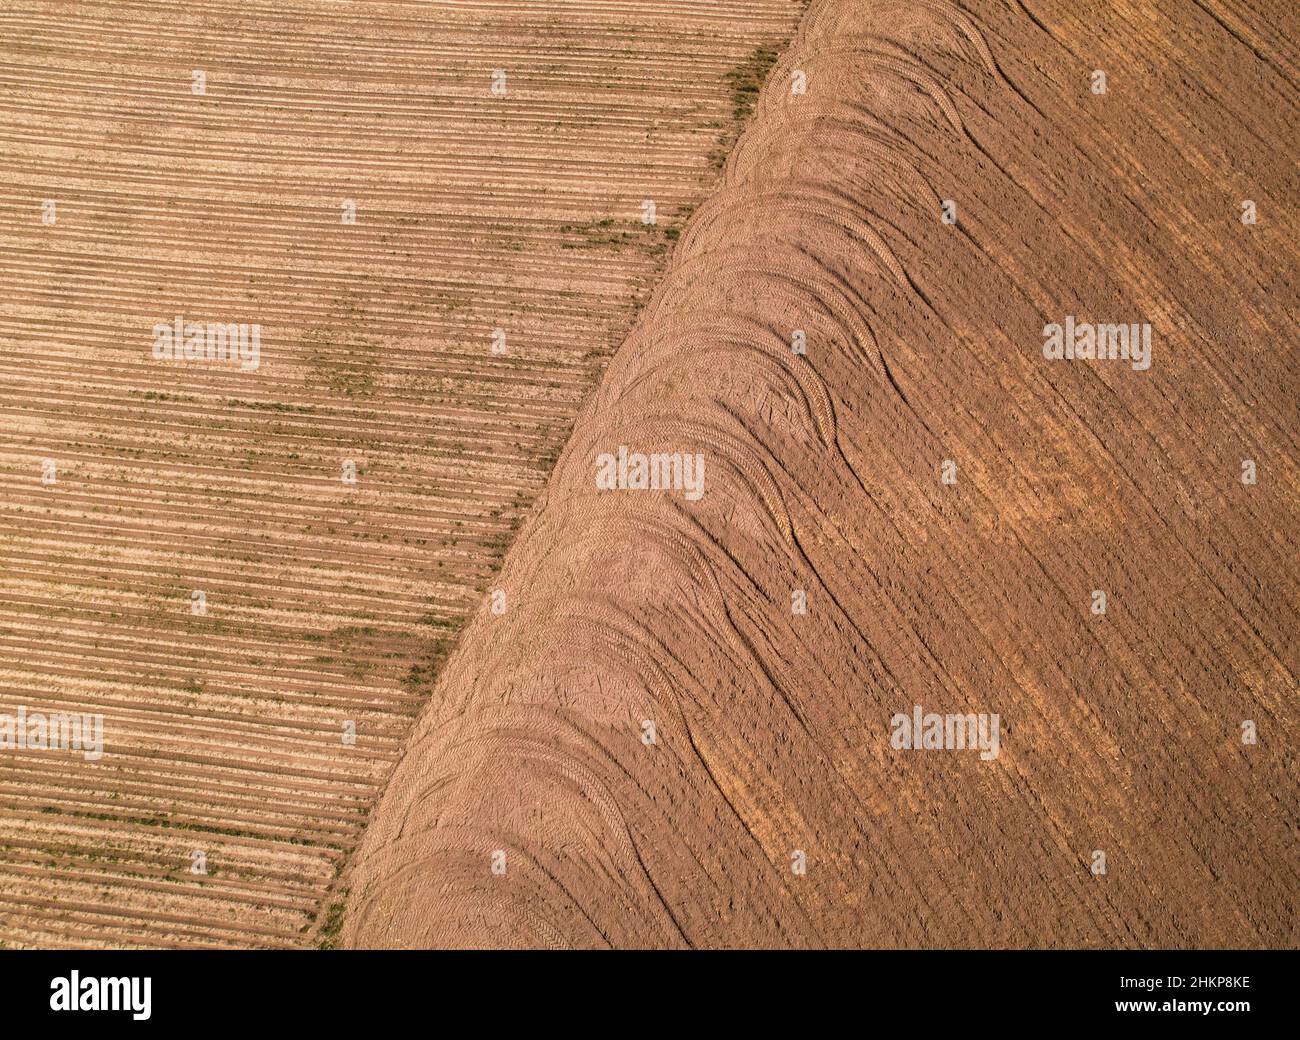 Pattern of repeating wheel tread marks on a plowed field. Stock Photo